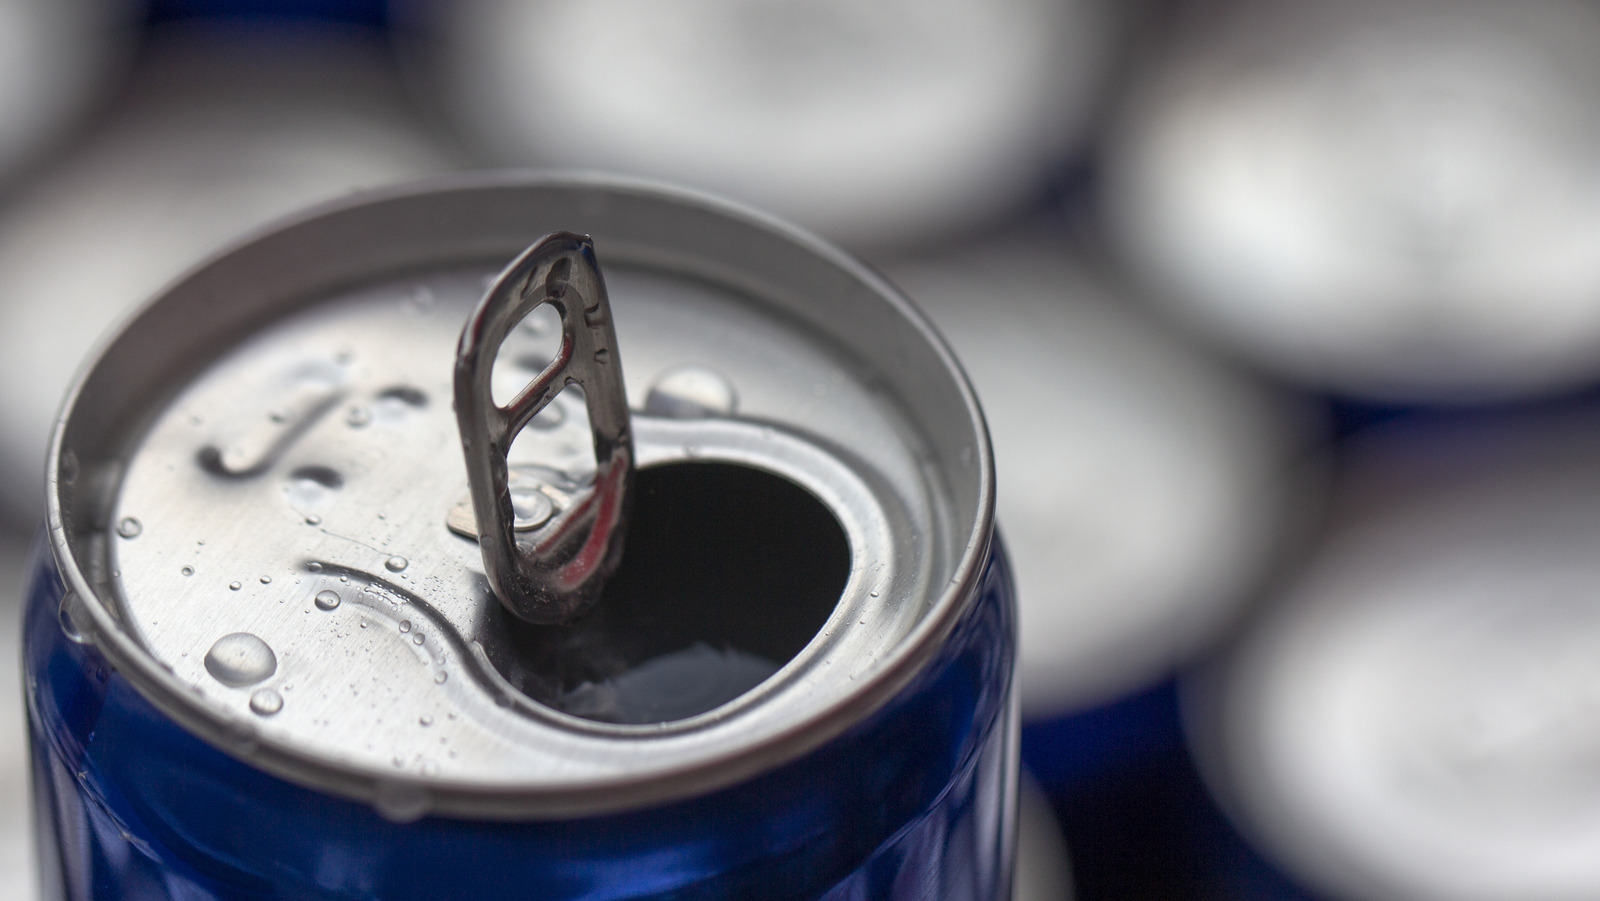 Can tabs: How aluminum pop tabs were redesigned to make drinking